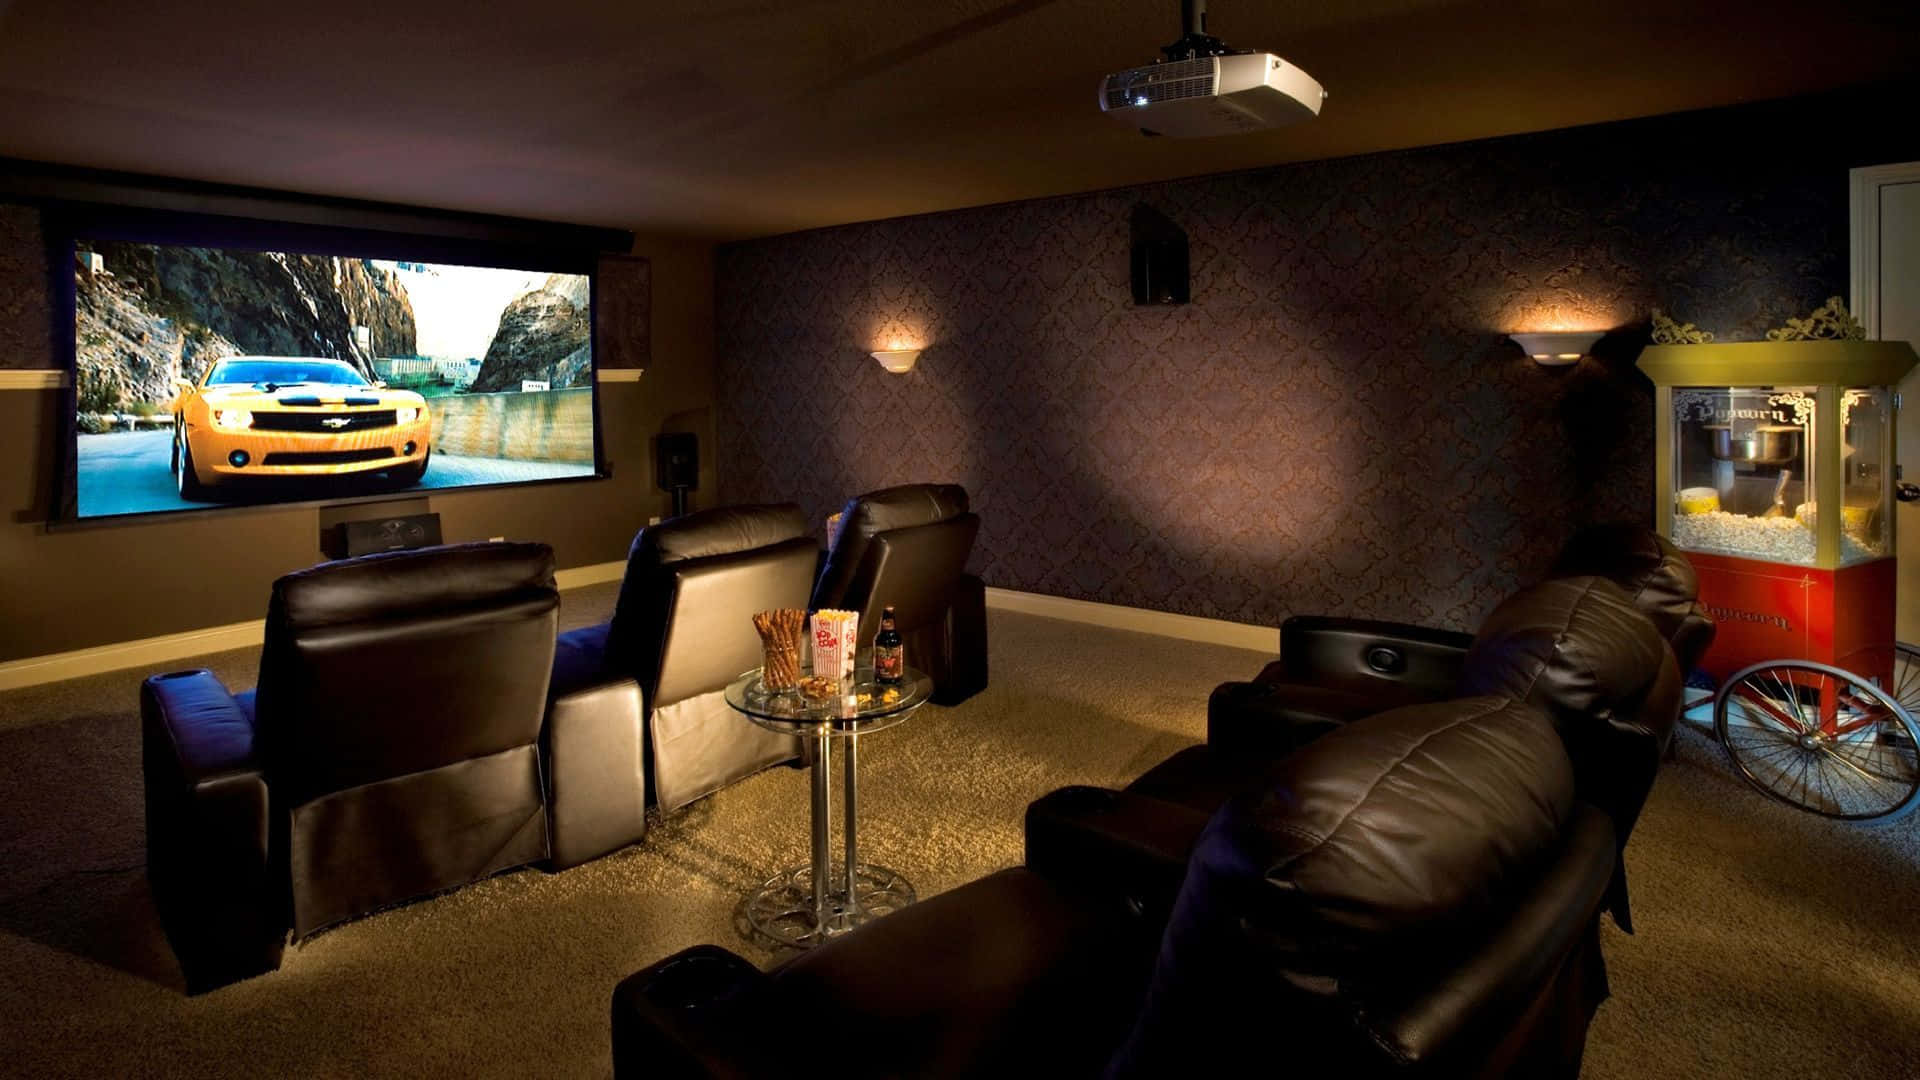 Home Theater Design Leather Cushions Popcorn Stand Wallpaper